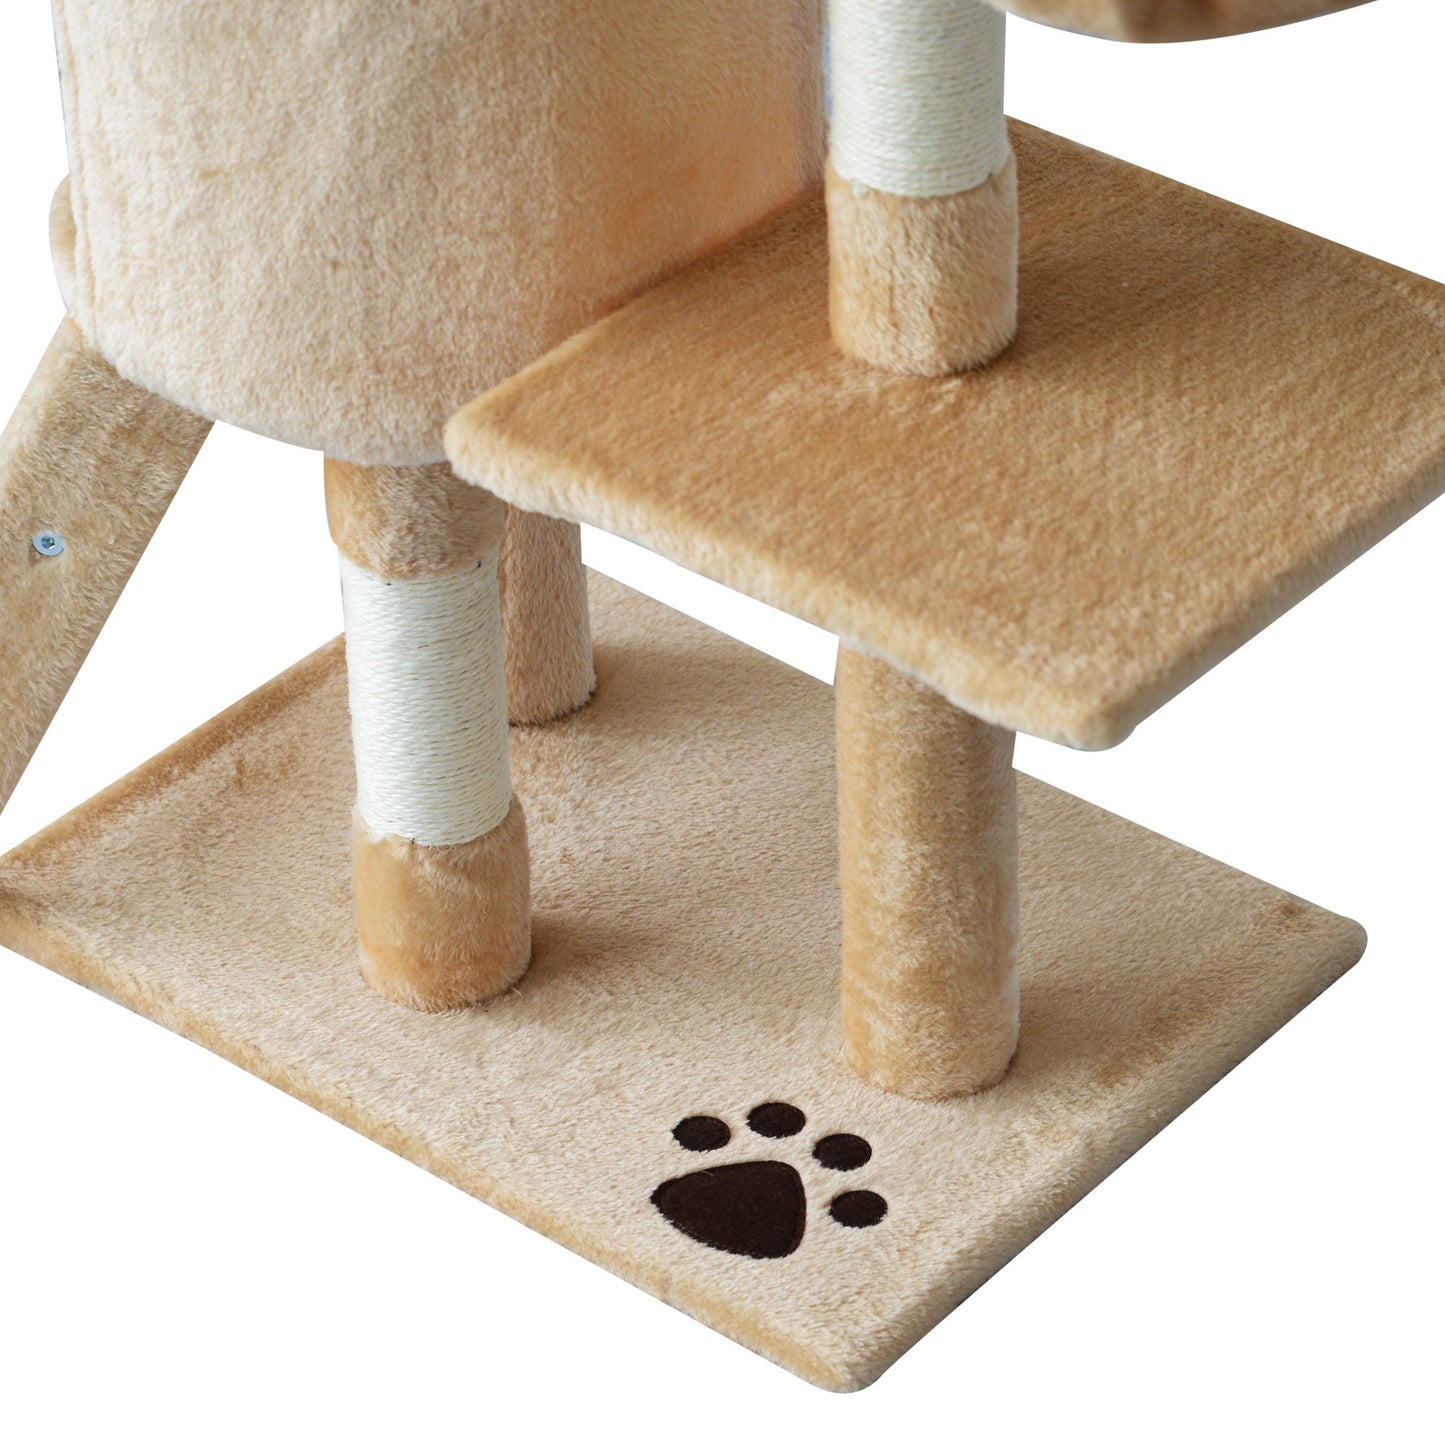 PawHut Cat Scratching Post 5-tier Tall Beige Condo Kitty Activity Centre Scratcher Climbing Tree with Toys Beige